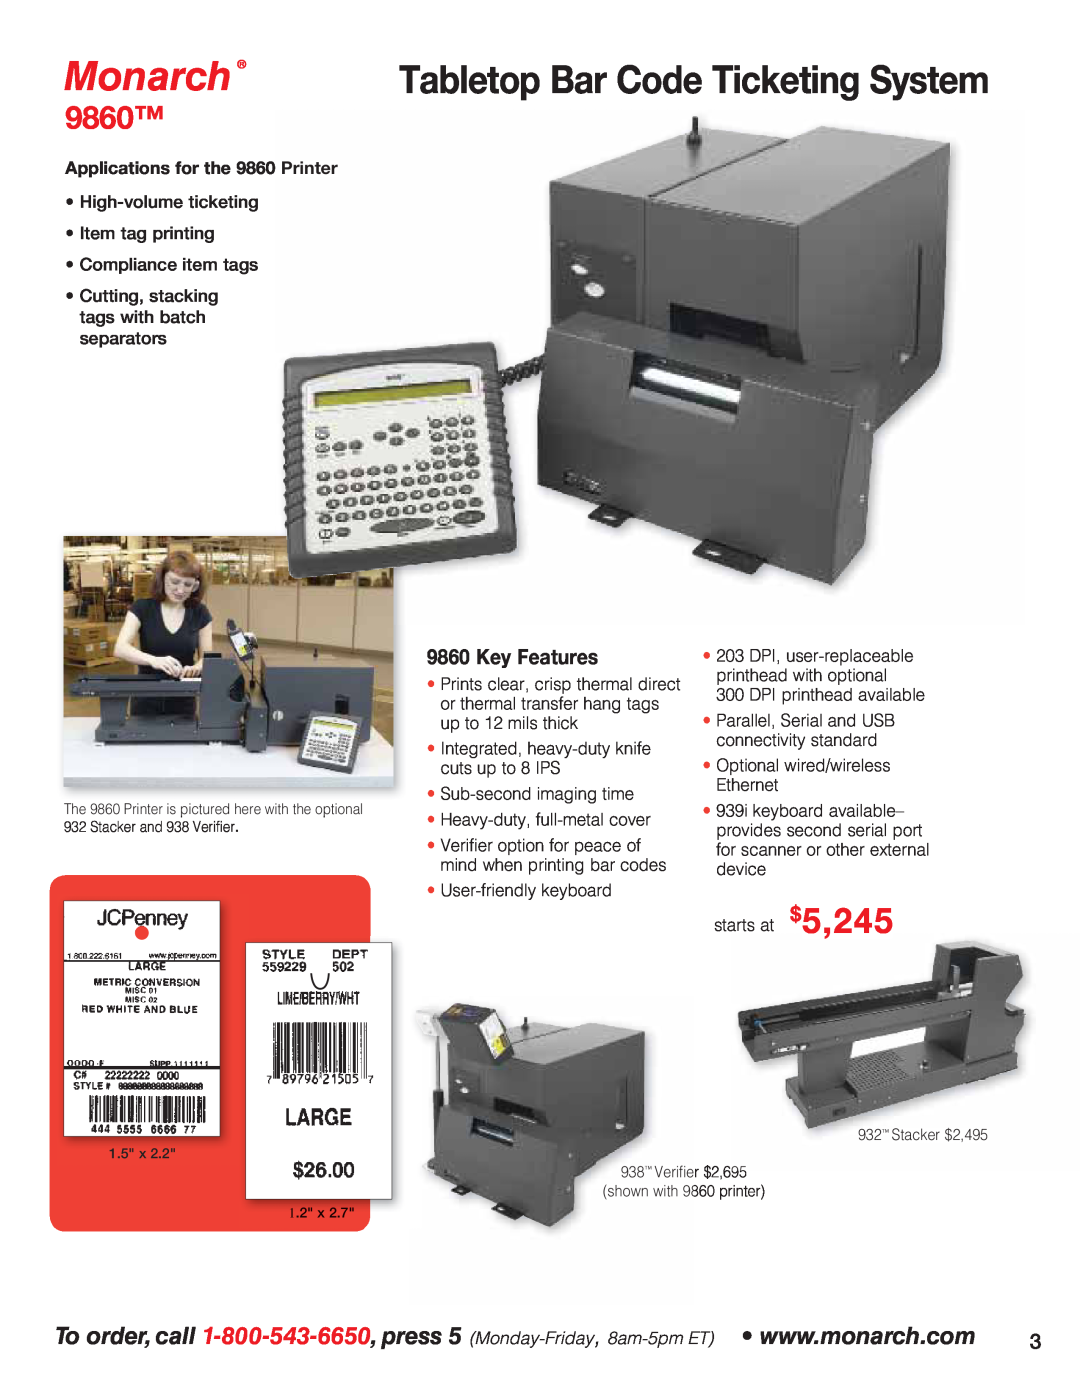 Avery 9854, 9864, 9825 Tabletop Bar Code Ticketing System, Key Features, Monarch, Applications for the 9860 Printer 